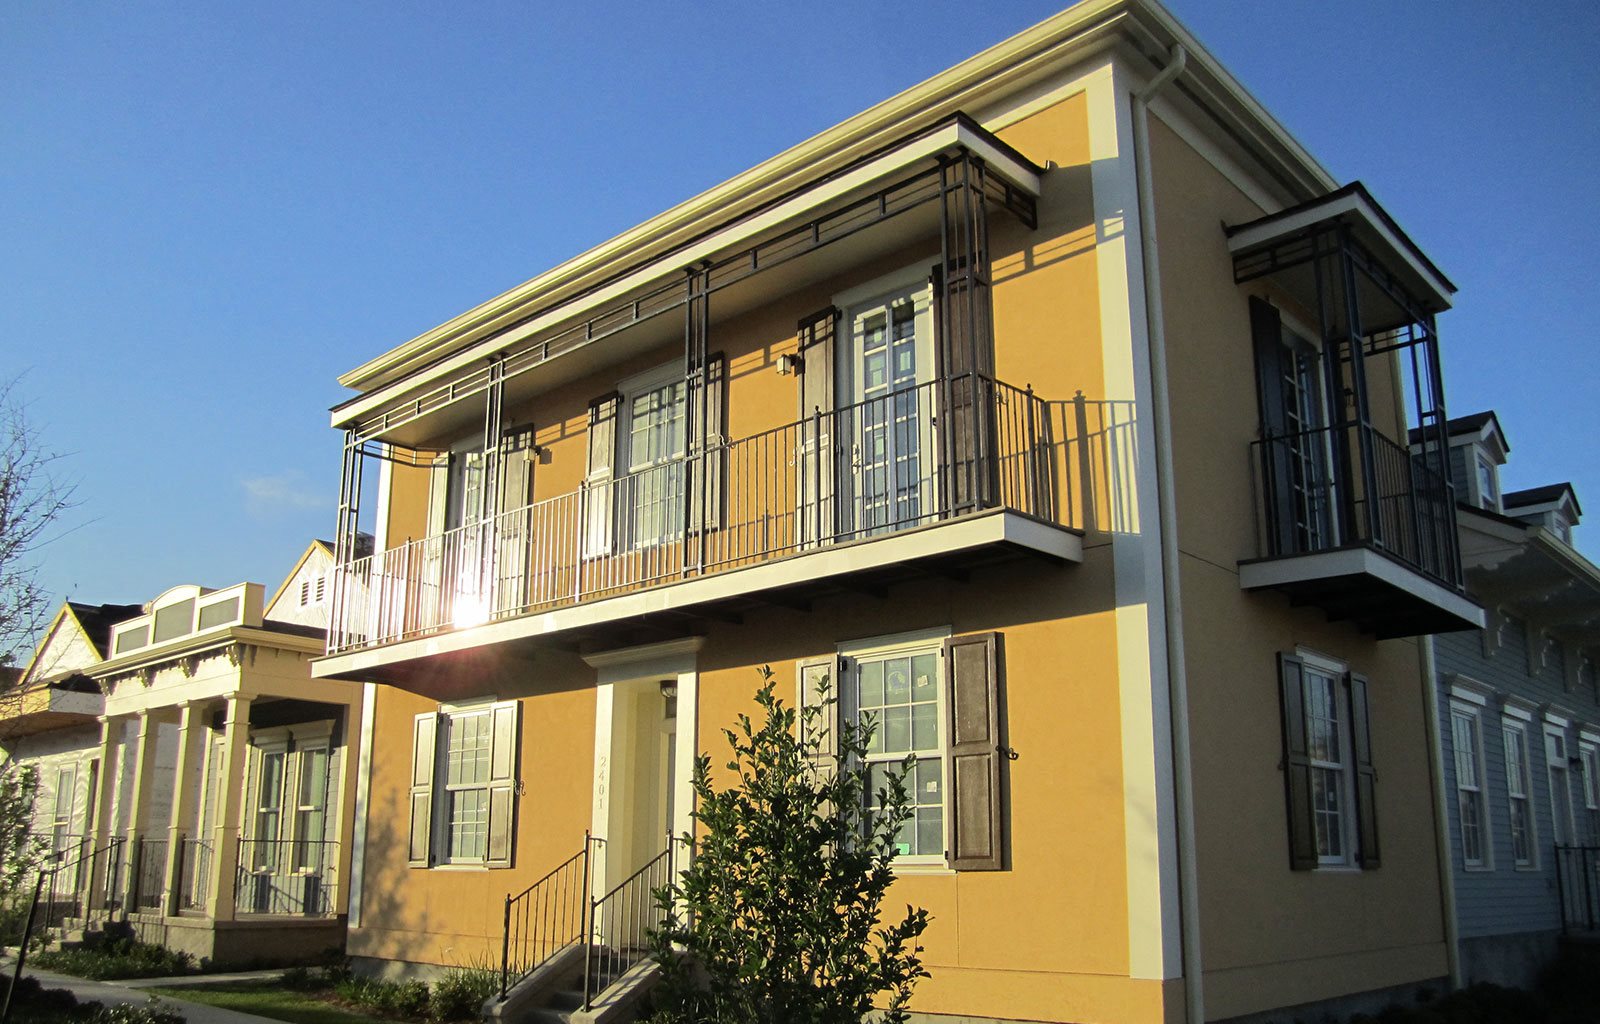 Faubourg Lafitte Apartments In New Orleans La